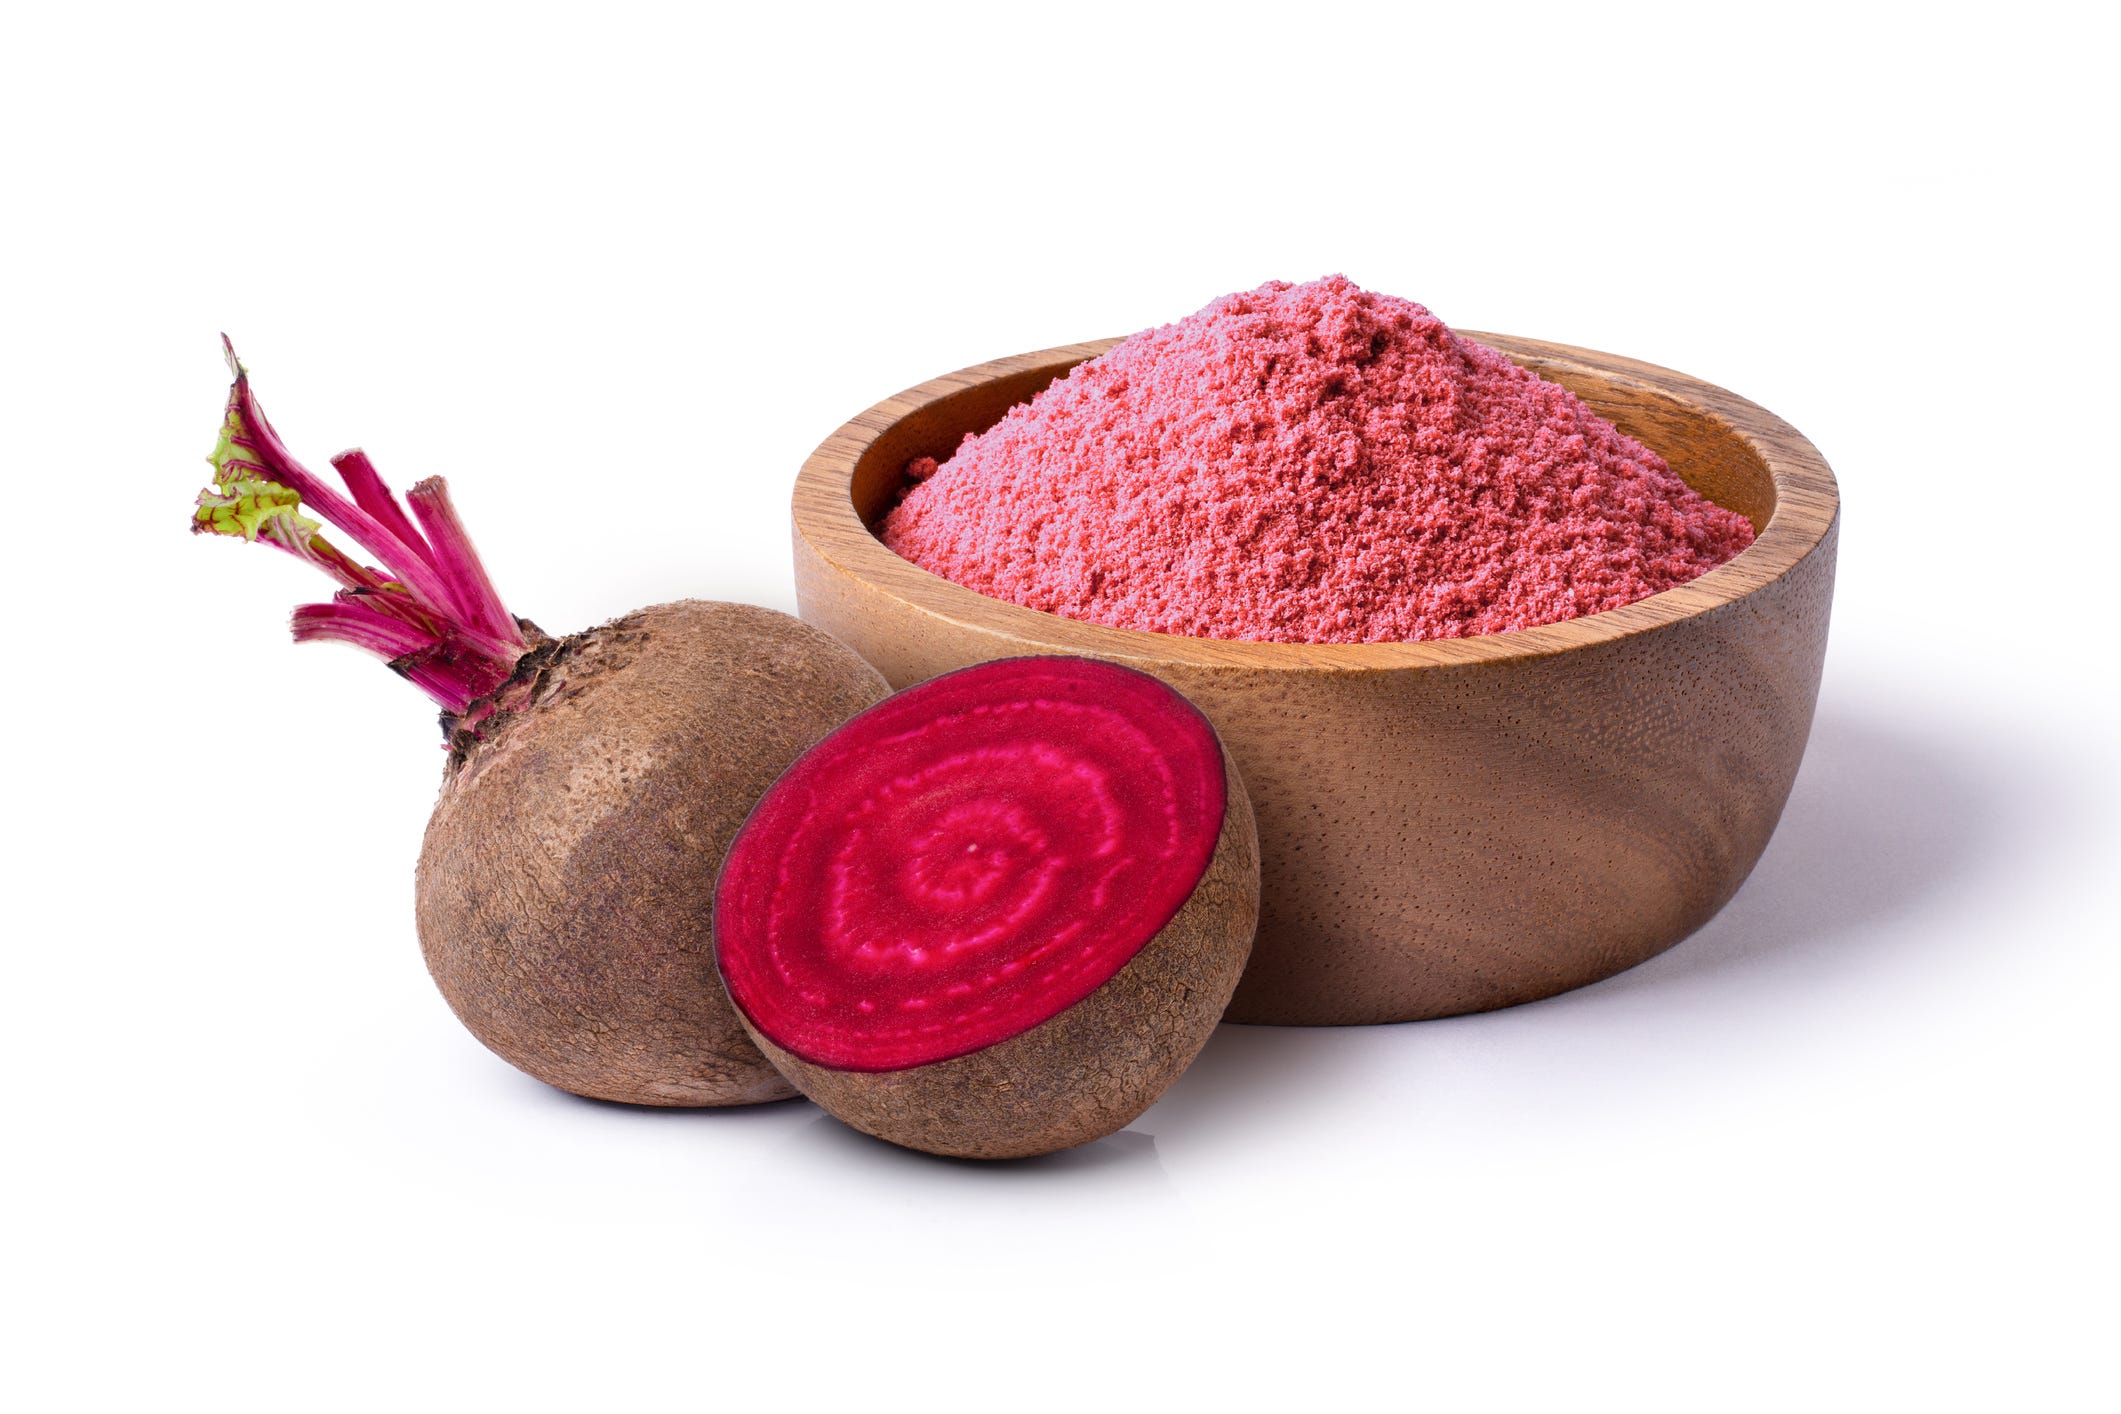 Beets for Cardio Metabolic Support